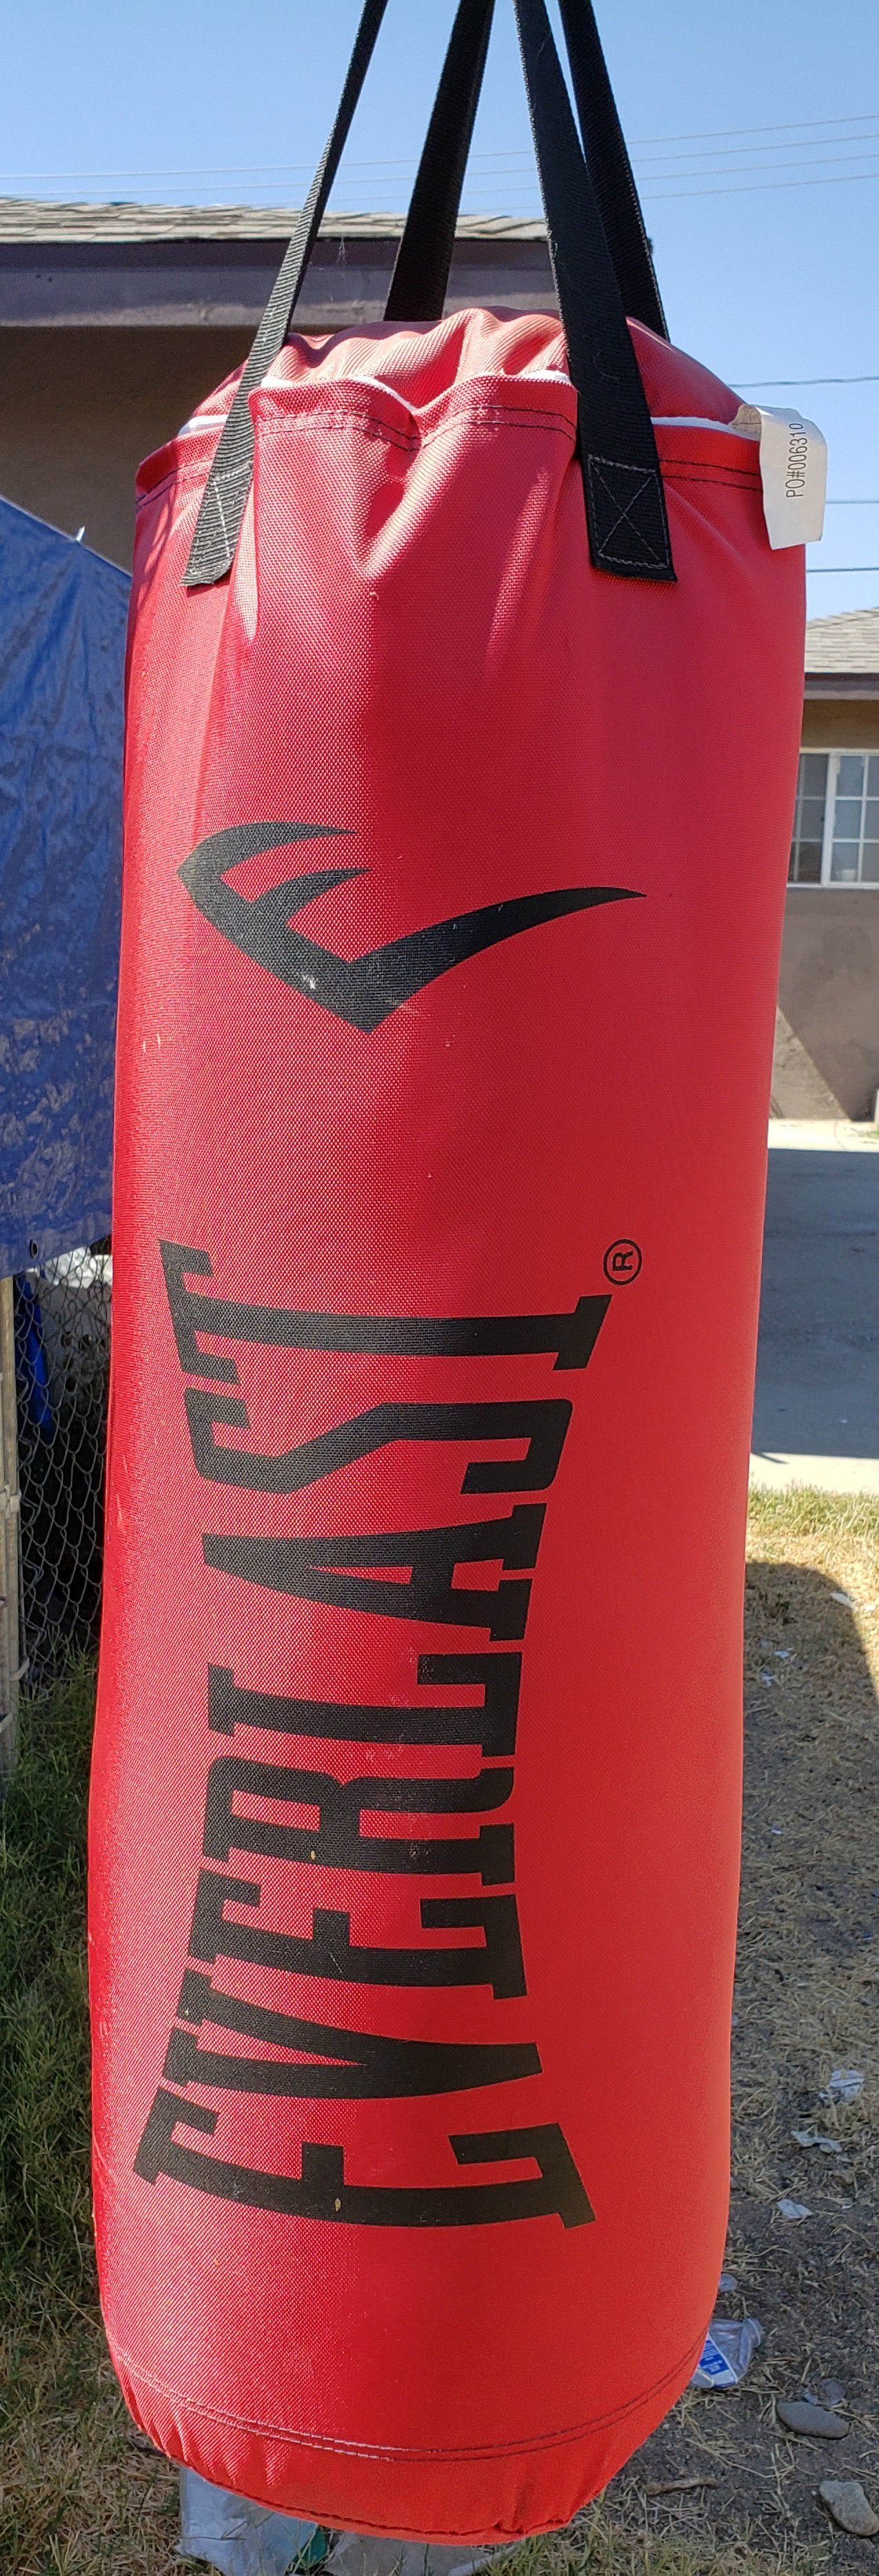 Everlast punching bag...with gloves.